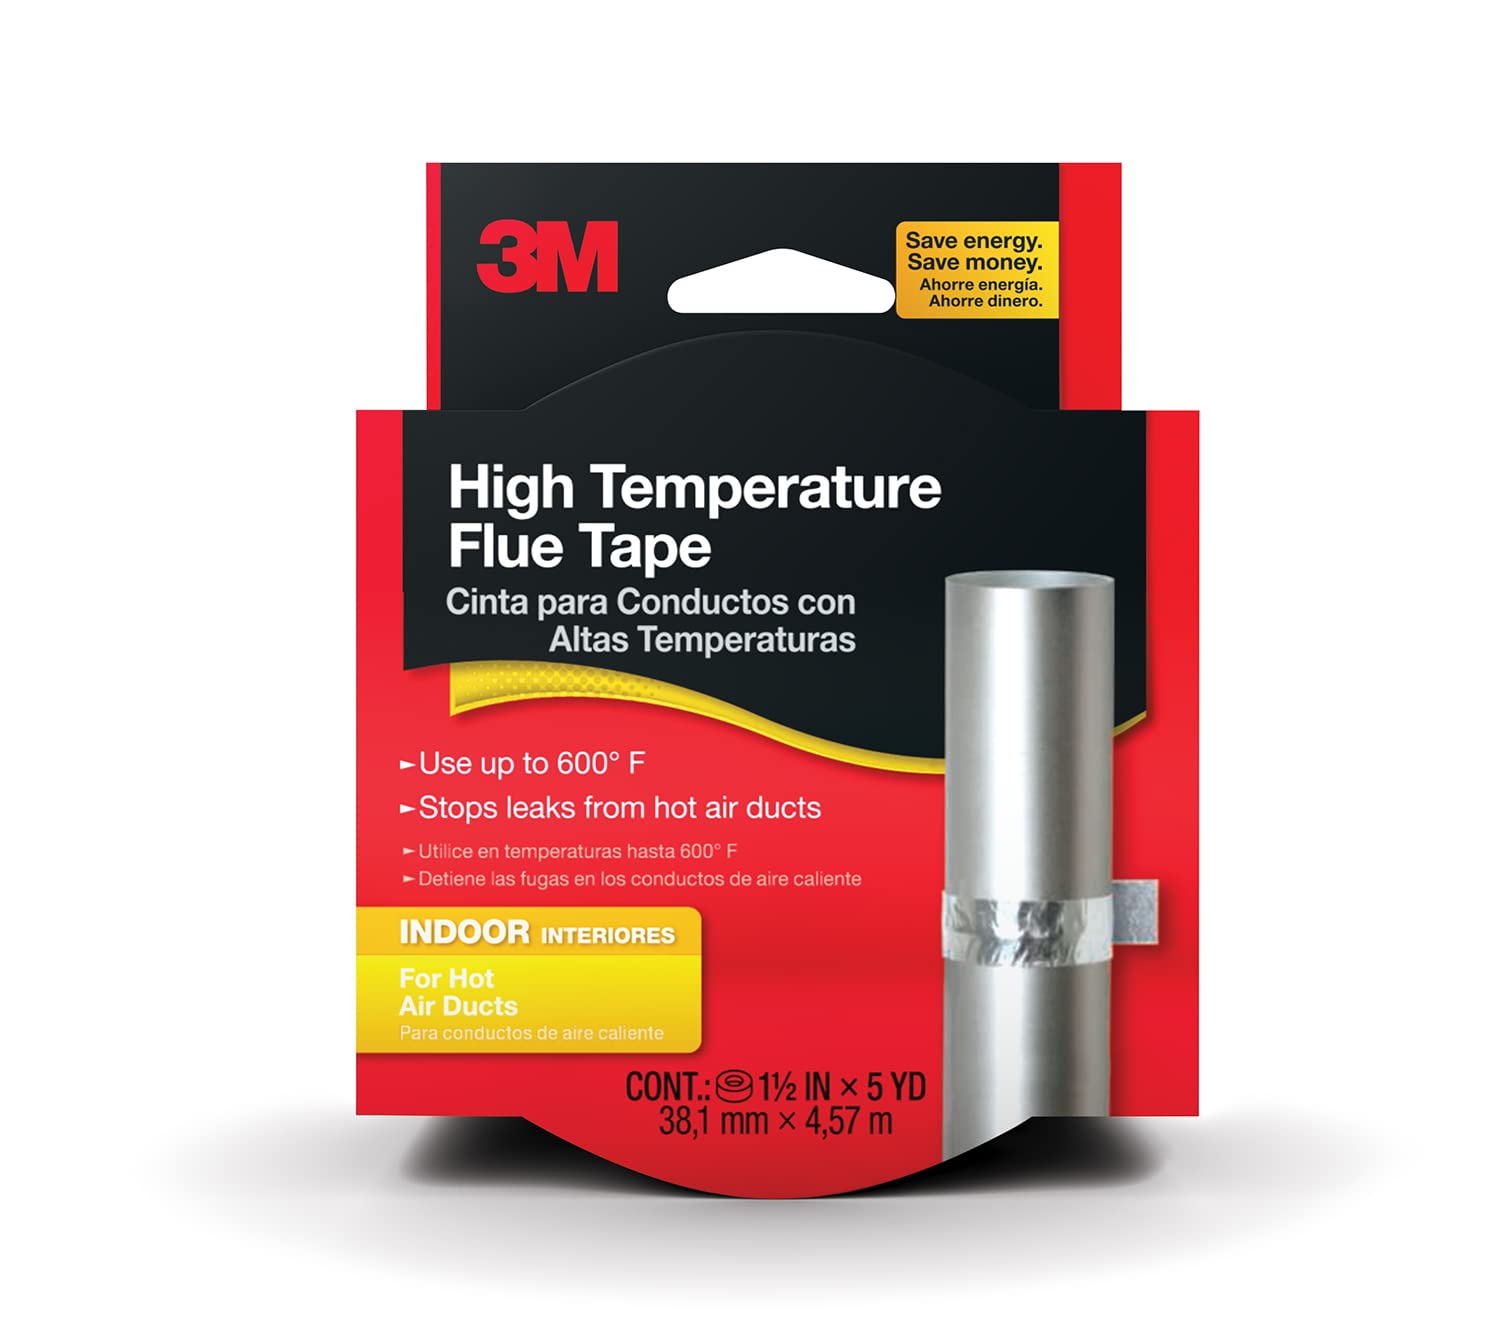 3M High Temperature Flue Tape High Heat Sealing Tape up to 600 degrees 15-Foot Roll